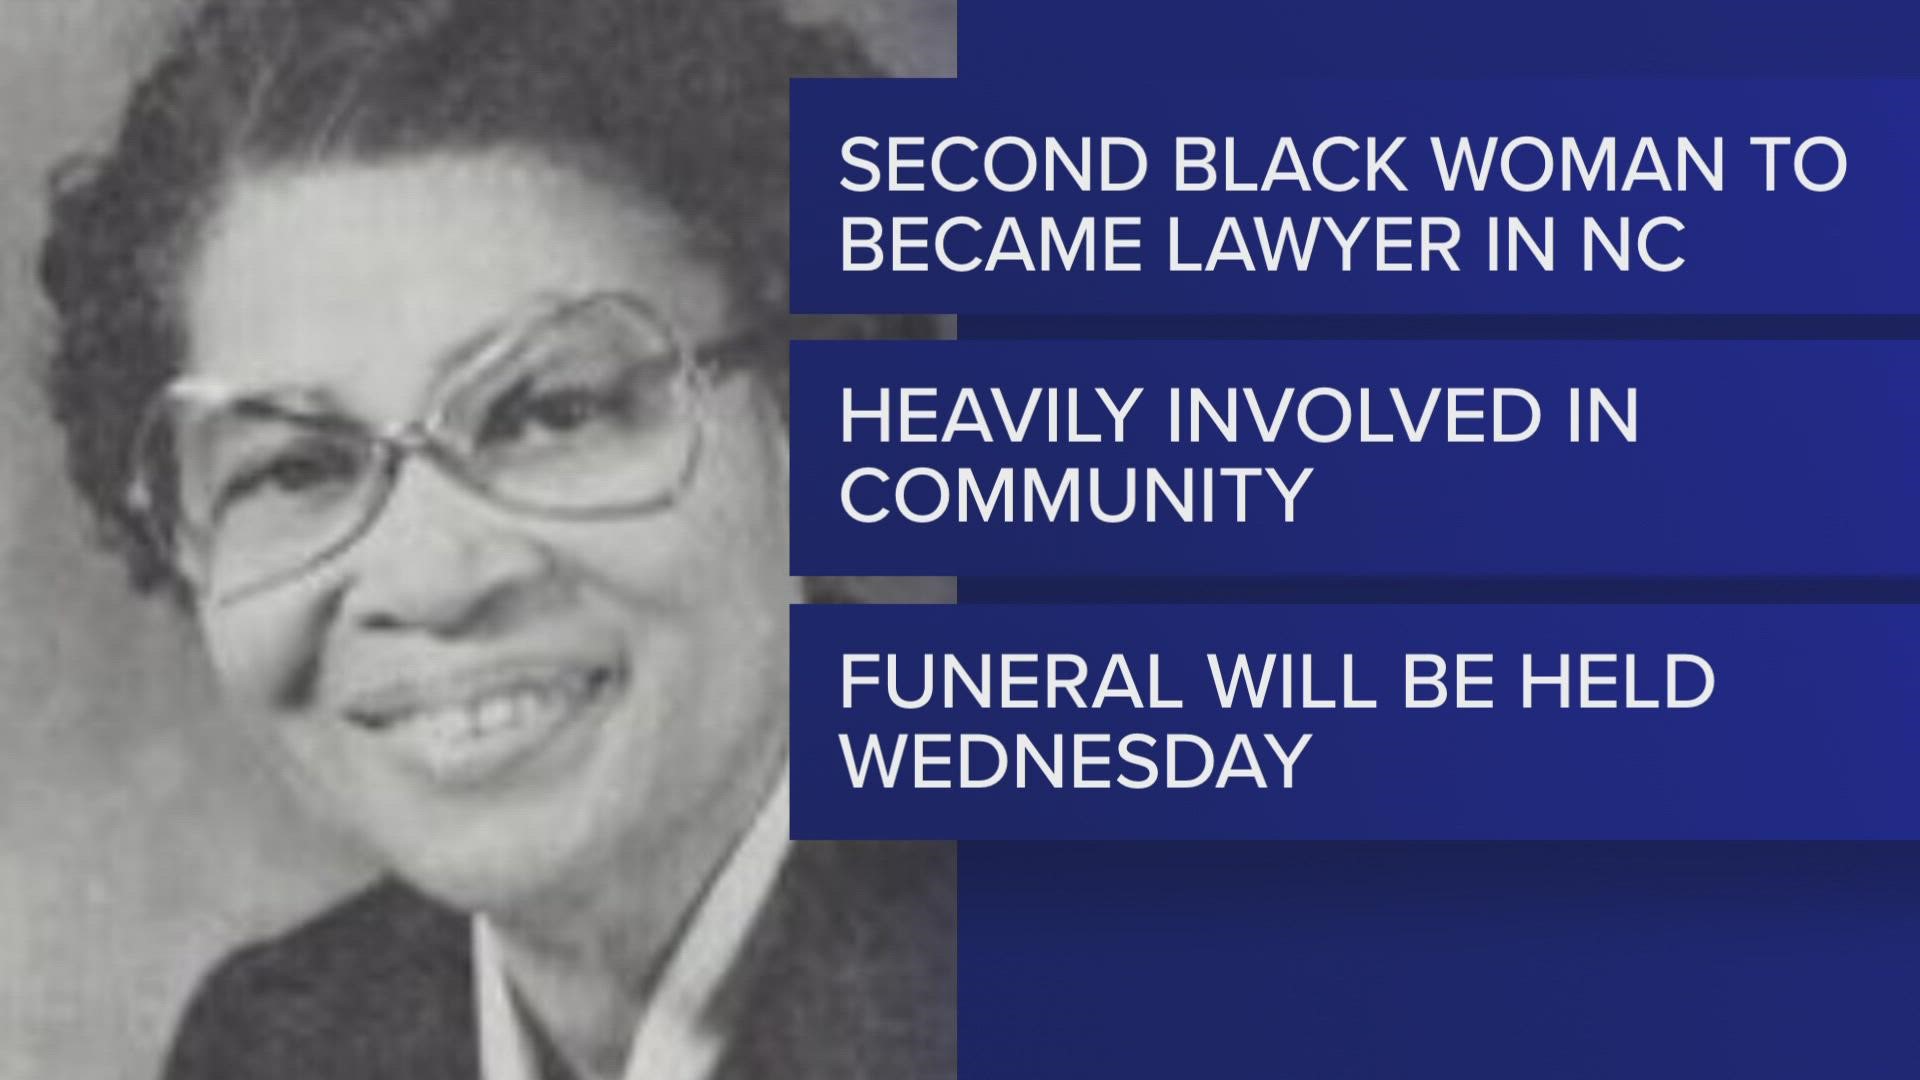 Annie Brown Kennedy died Jan. 17. She was the first Black woman to serve in the NC General Assembly.